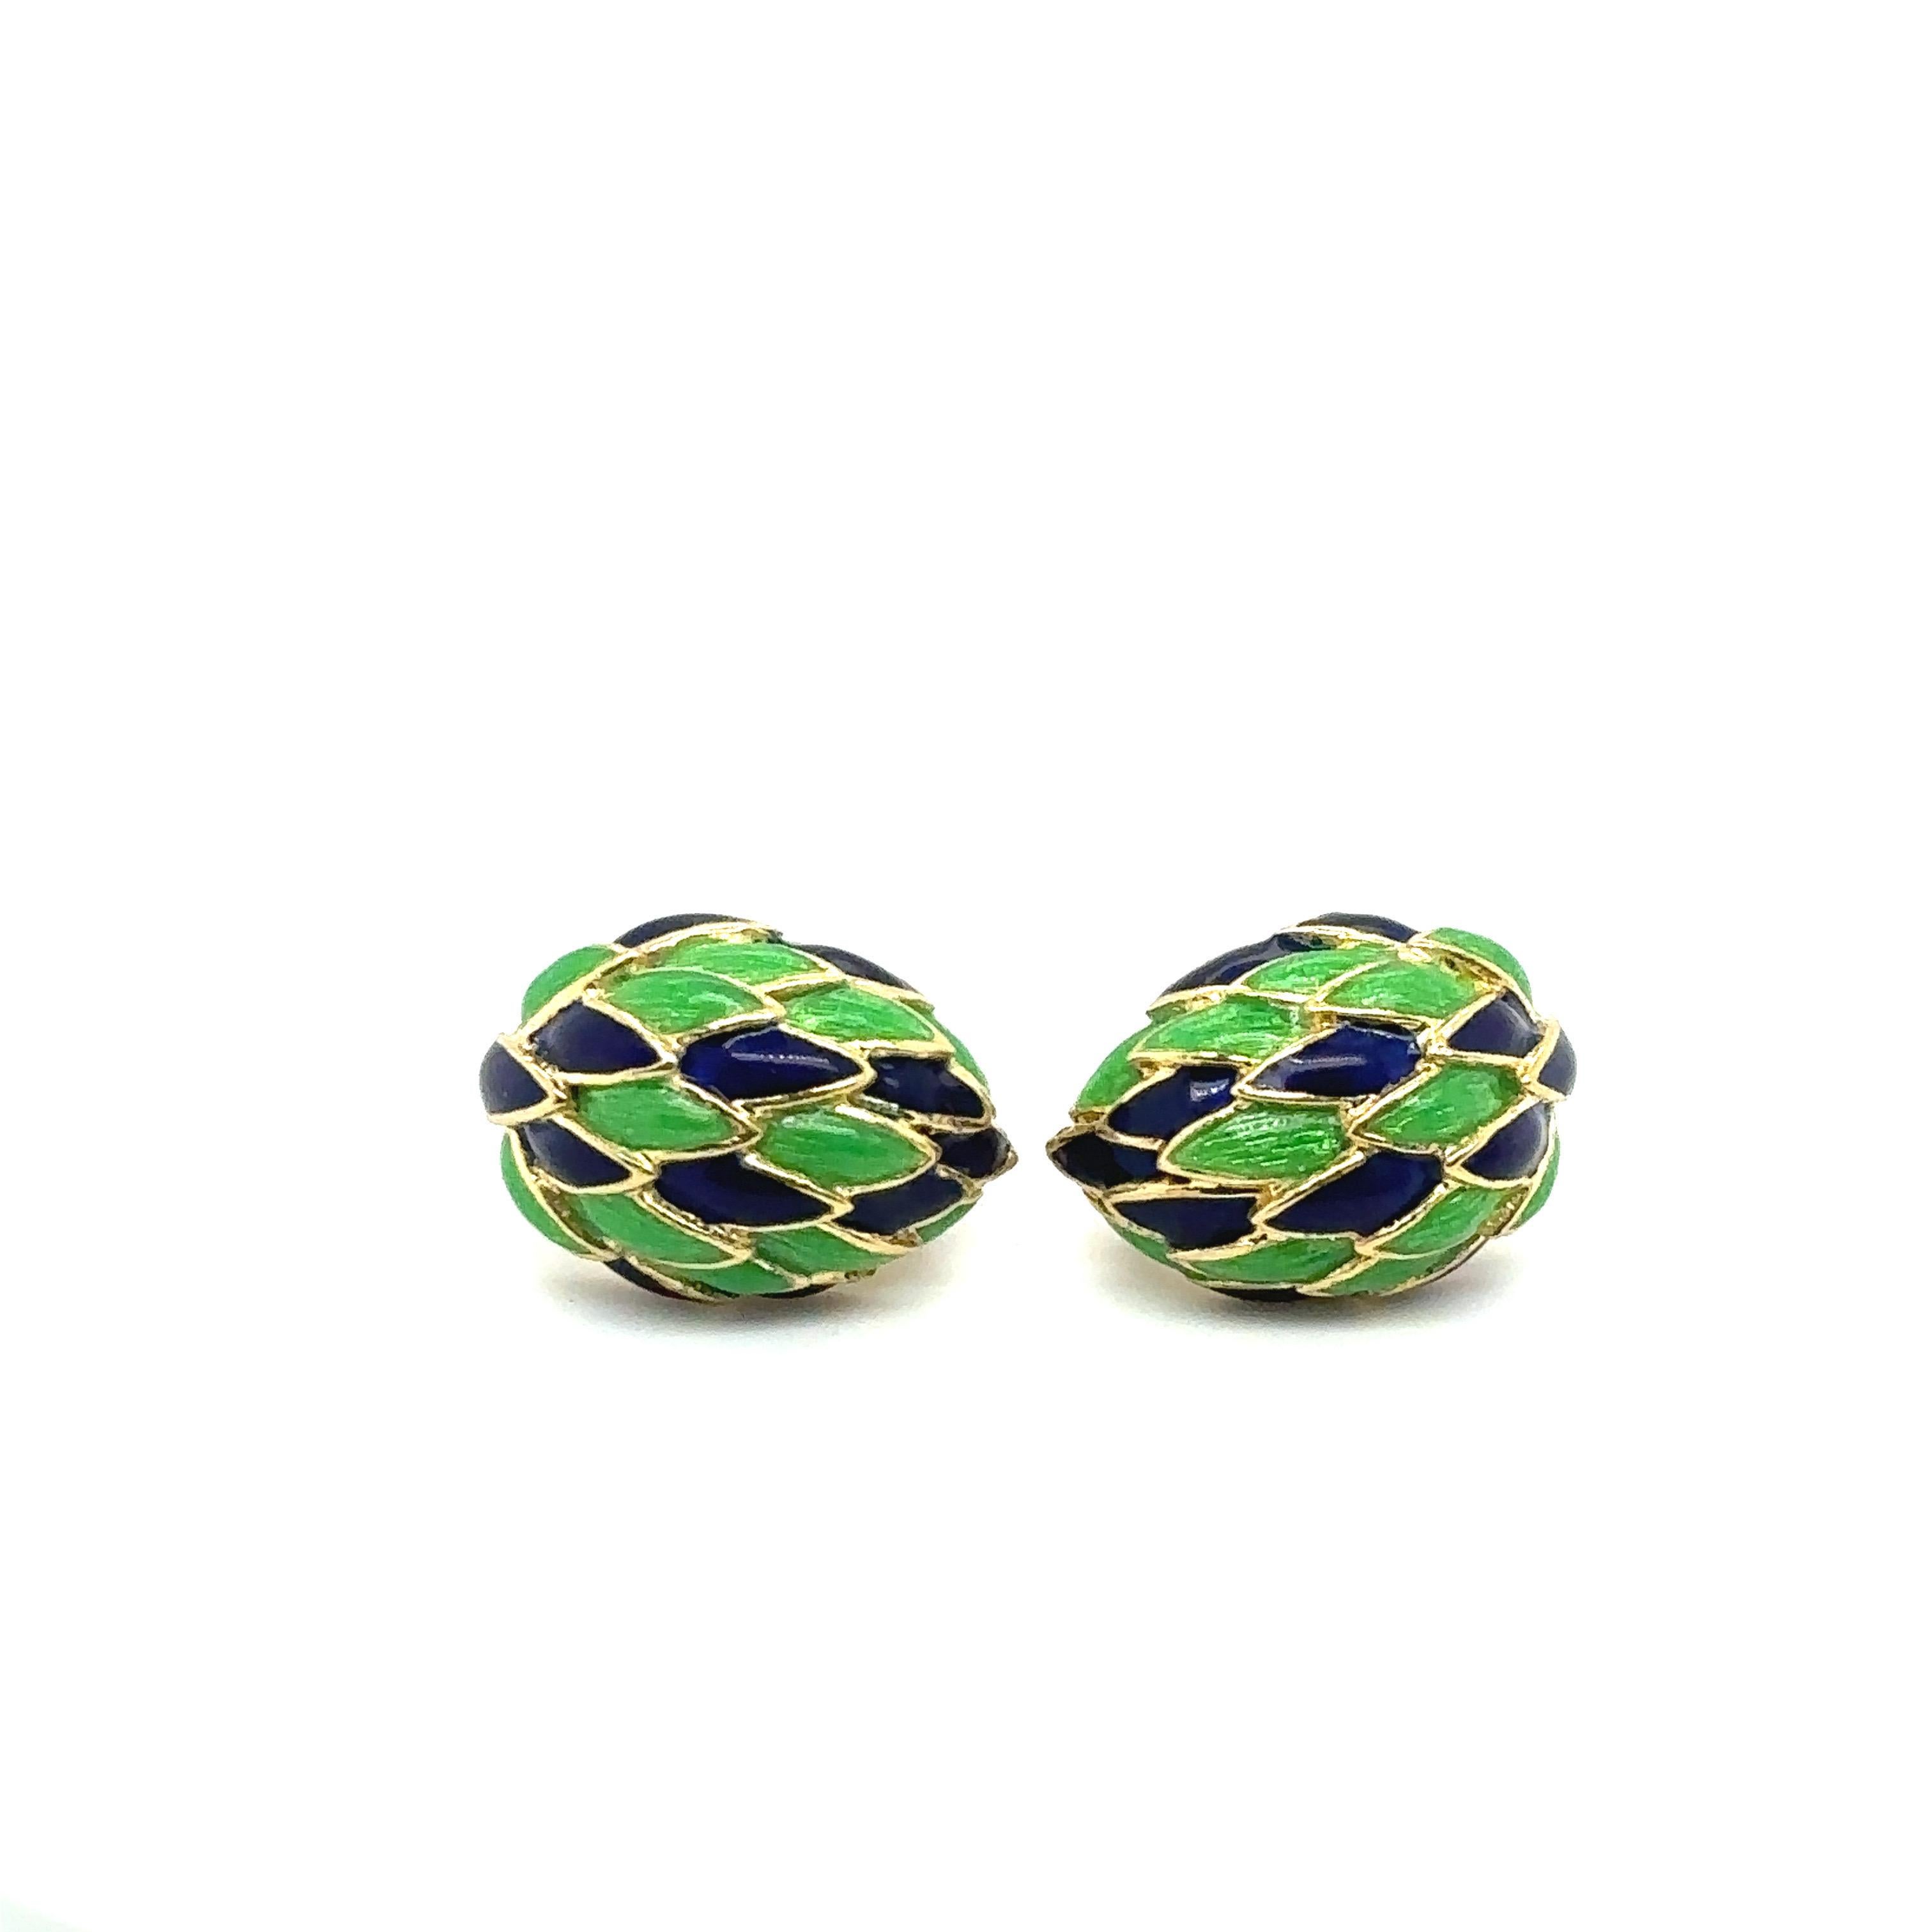 Cartier 1960s Enamel and Gold Earrings In Excellent Condition For Sale In New York, NY